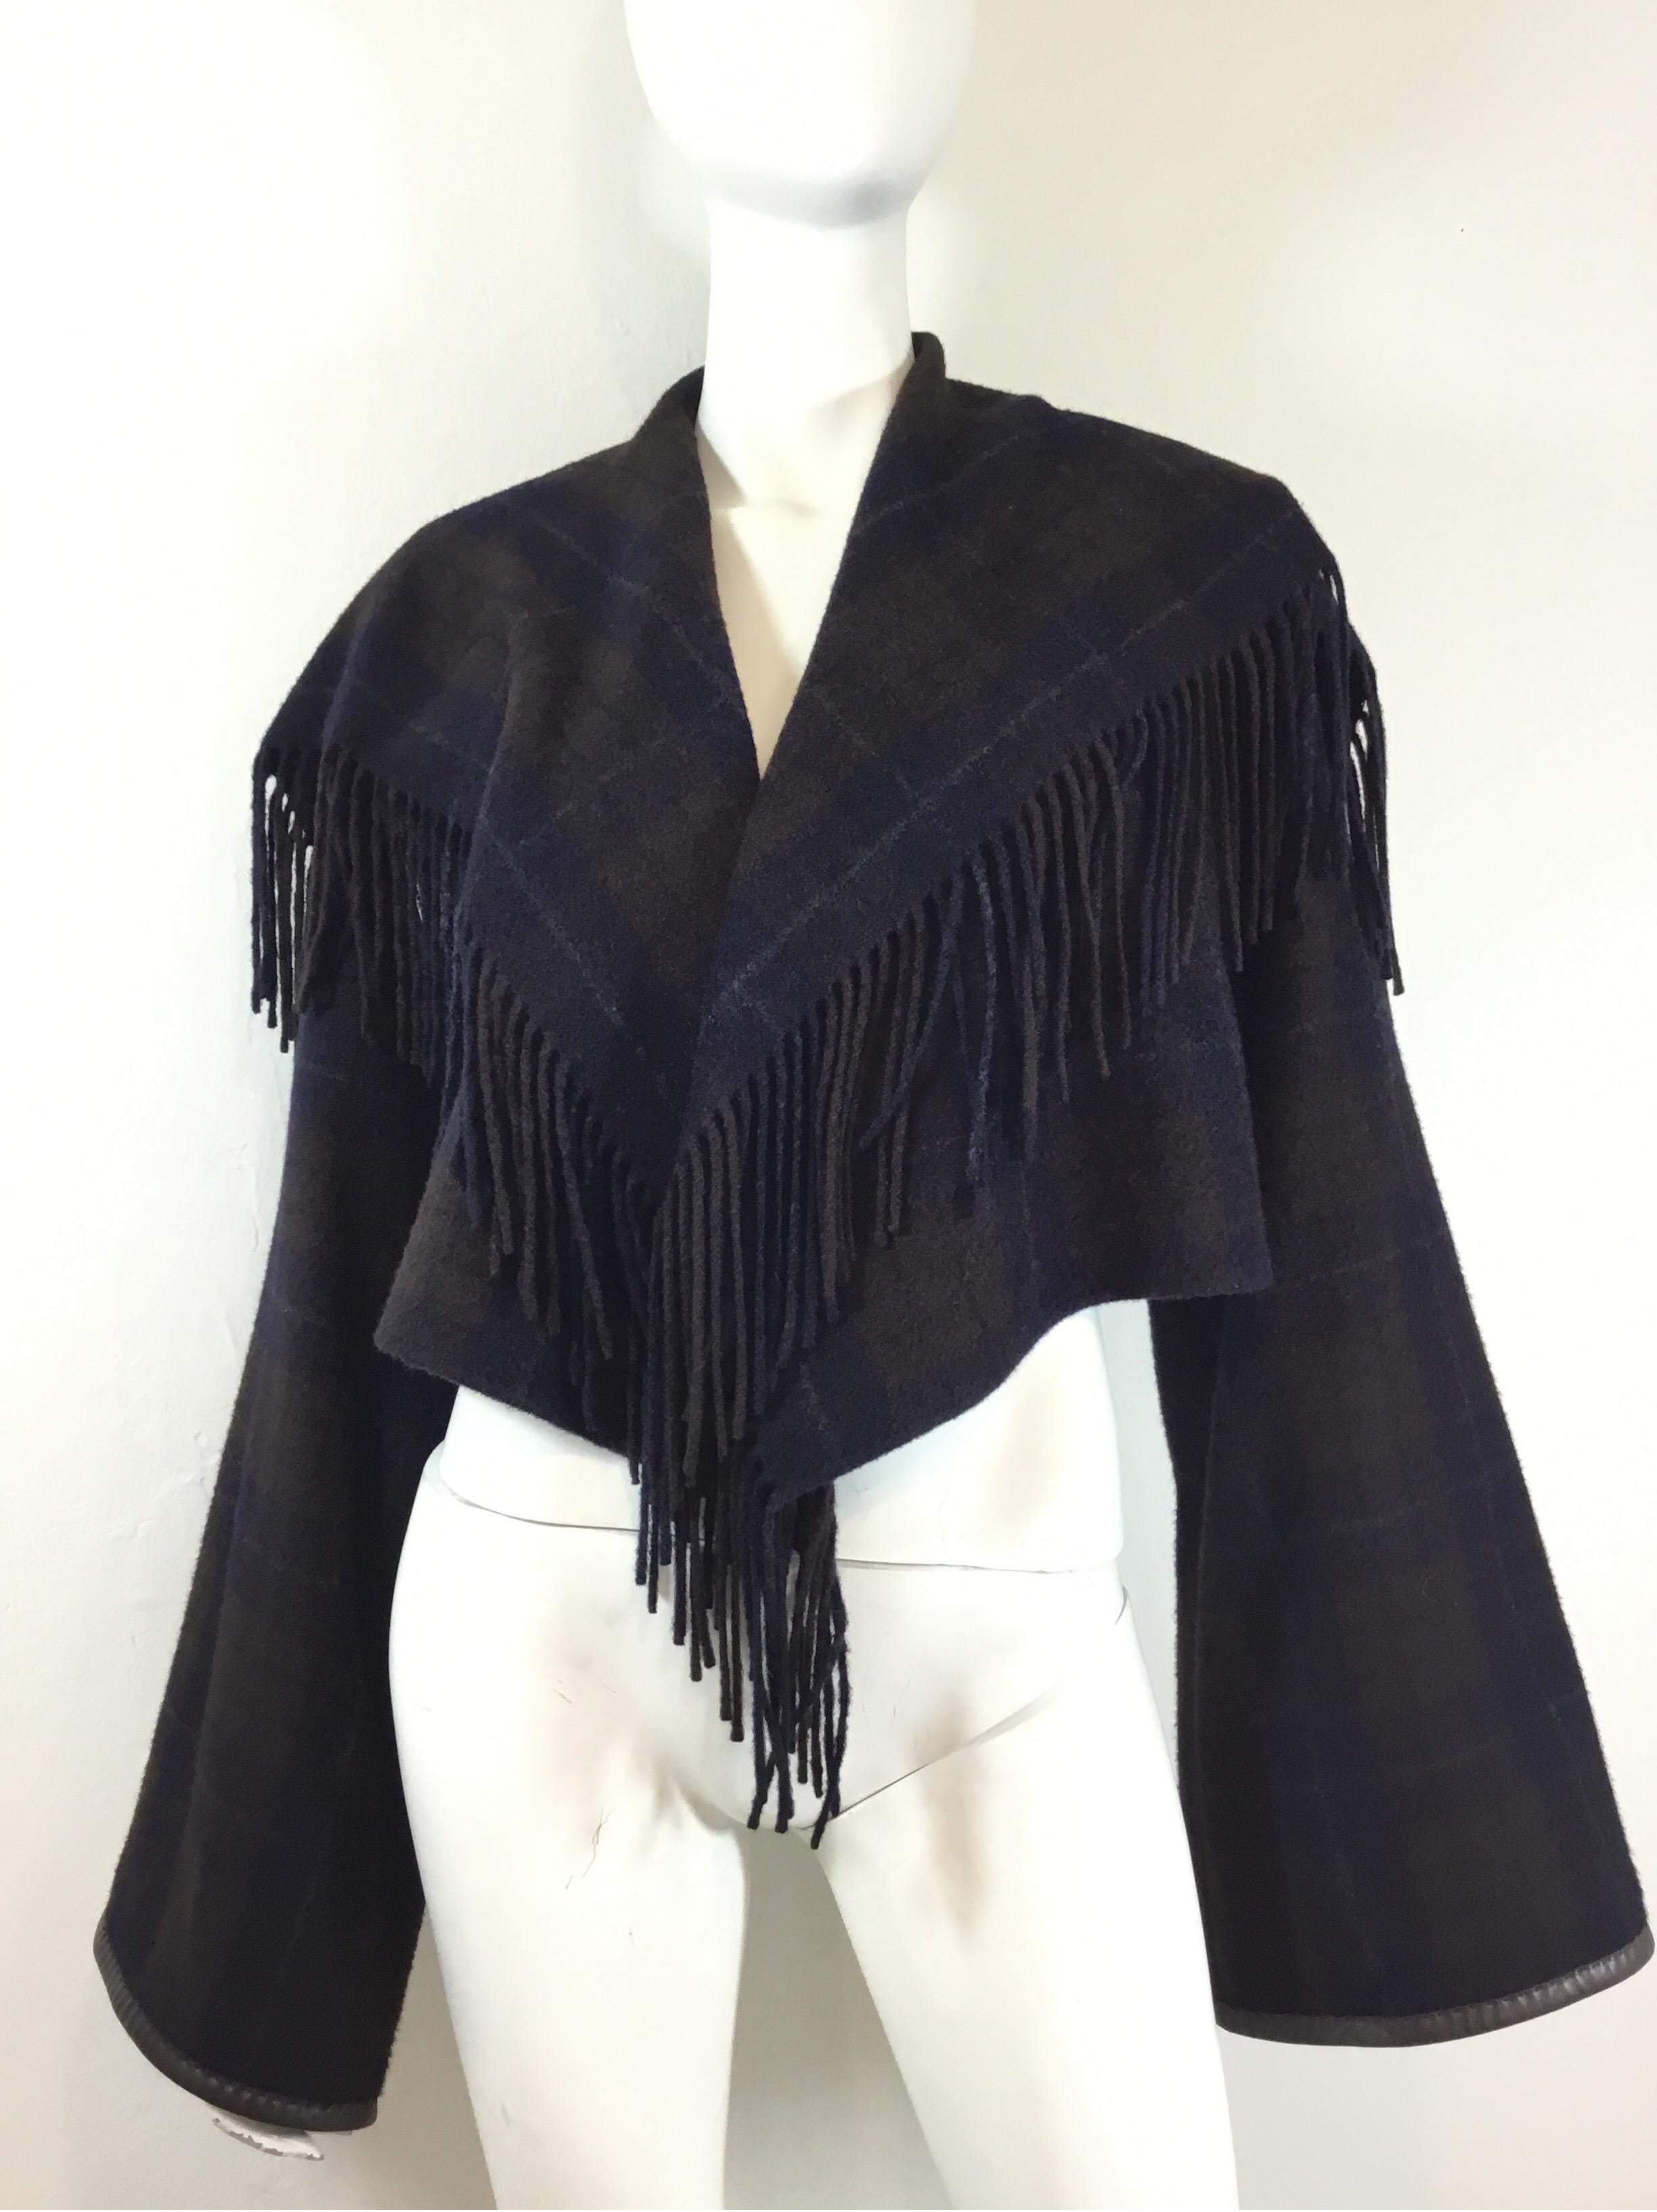 Hermes capelet features a plaid pattern throughout with a leather and fringe trimming, wide bell sleeves, and is composed of 100% cashmere. Size 34, Made in France. Excellent condition.

Bust 36”, sleeves 27”, length 19”